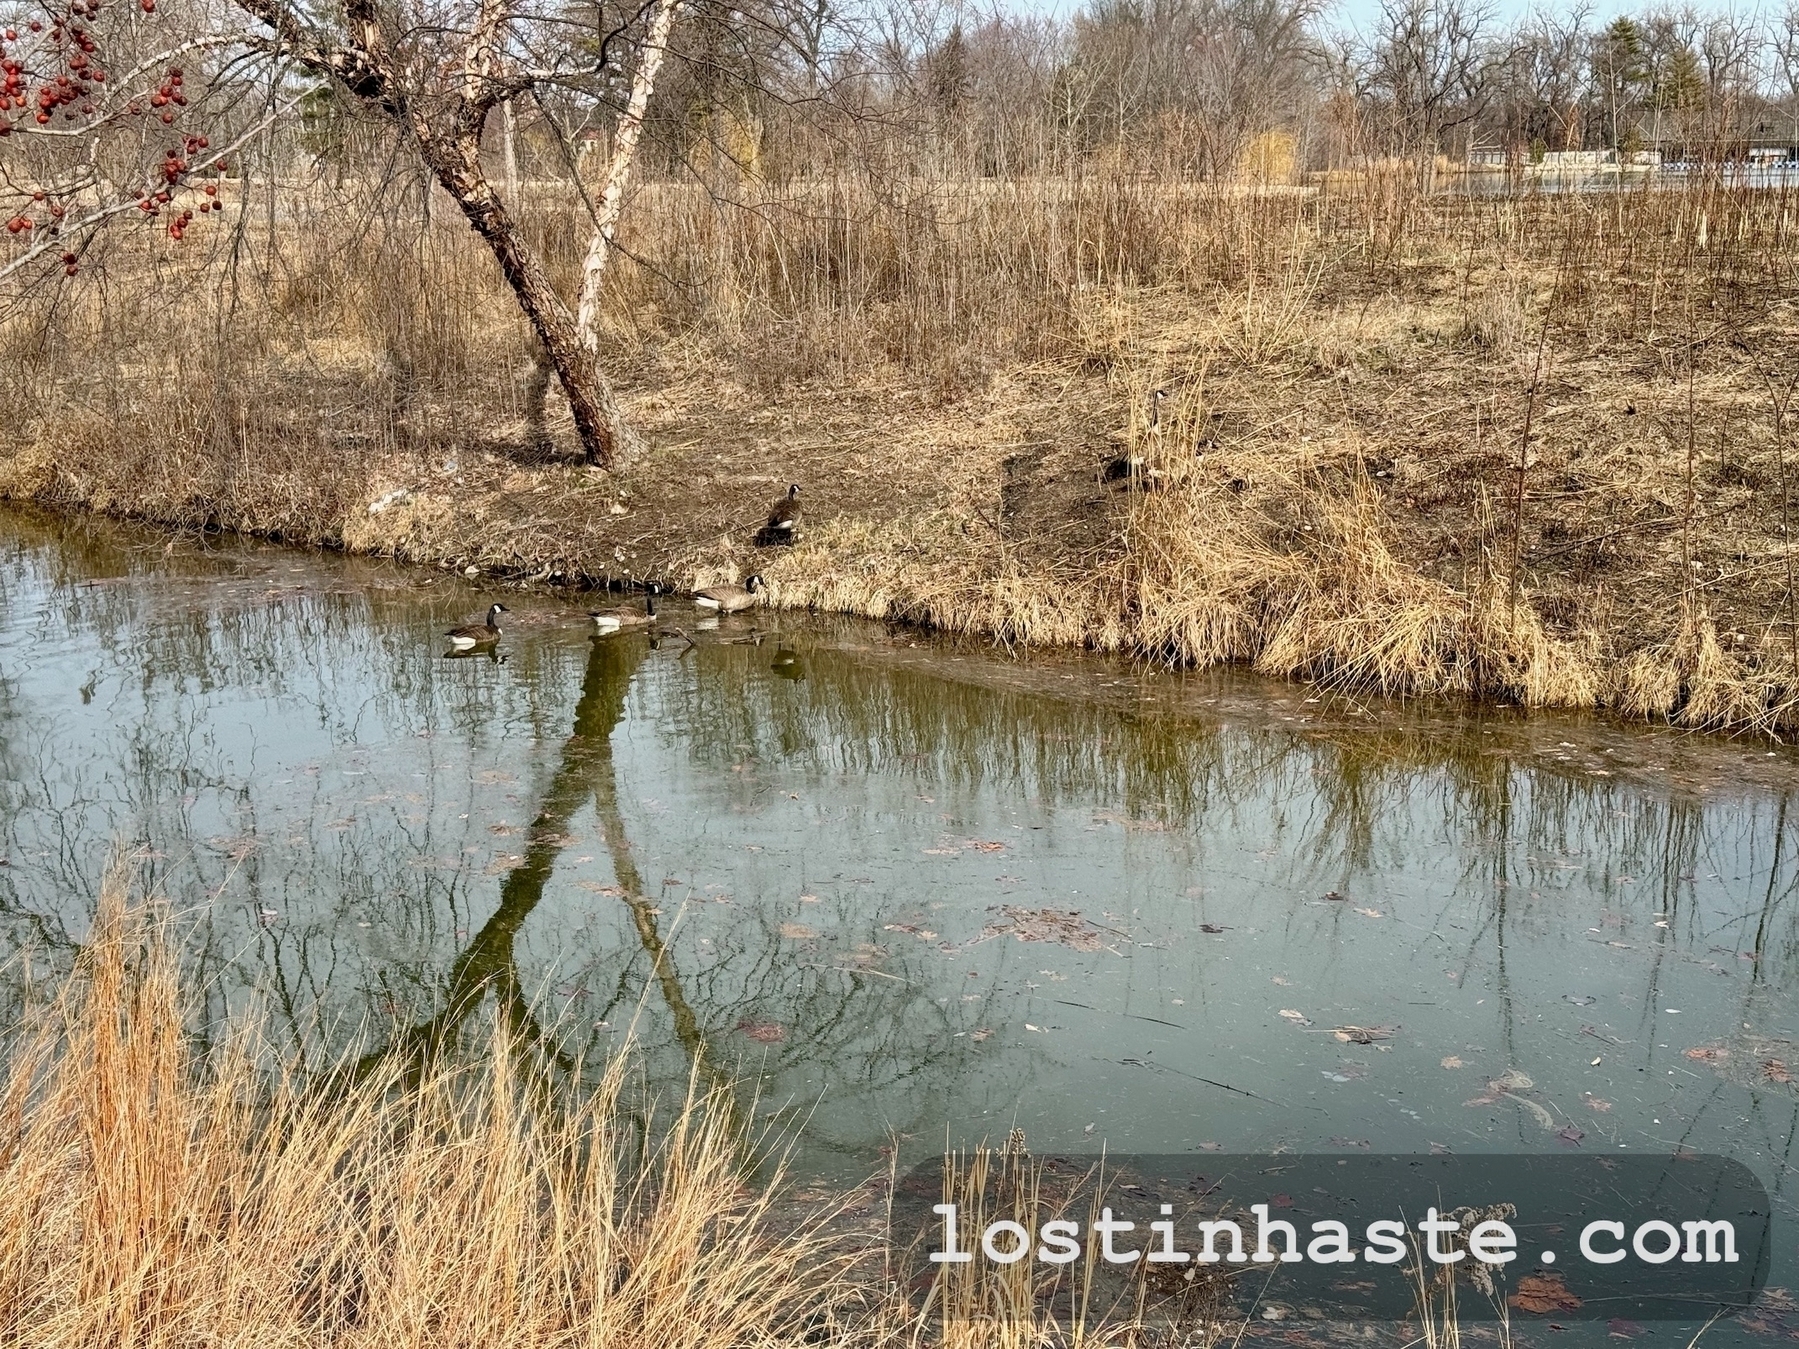 Ducks swim and rest by a calm river's edge amidst bare trees and dry vegetation.